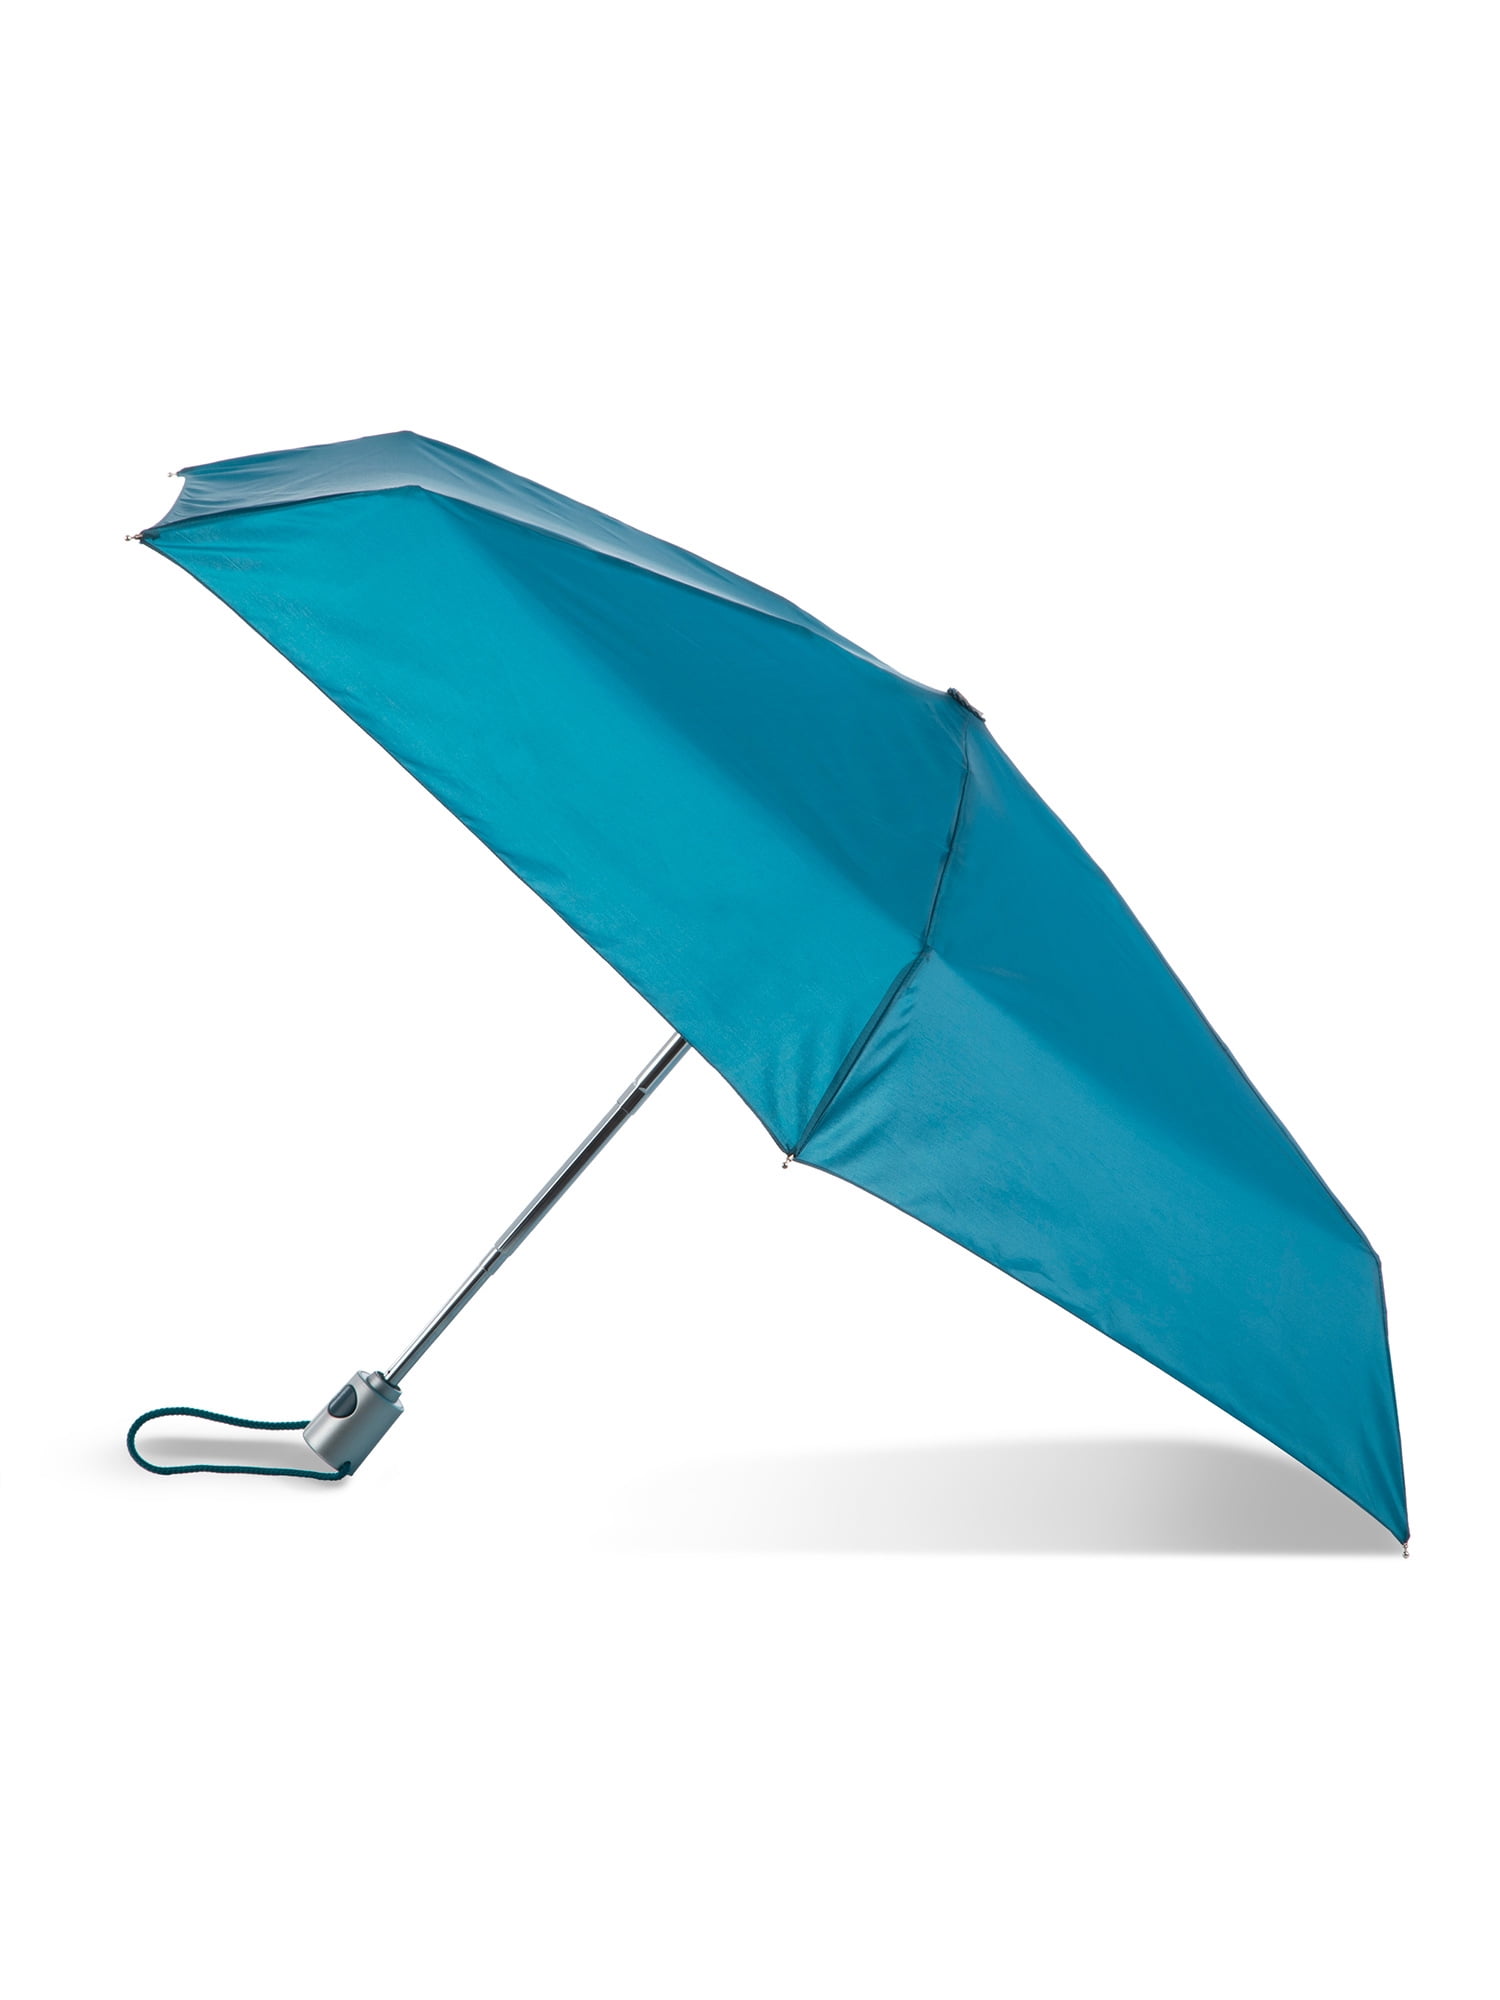 Totes Recycled Canopy One Touch Auto Open Ultra Compact Mini Travel Umbrella With Carrying Case Teal 1d5f25f1 dc58 4817 92e9 713789a67322 1.2ee1d24fa16d2b57d4a95ebb0aea0a50